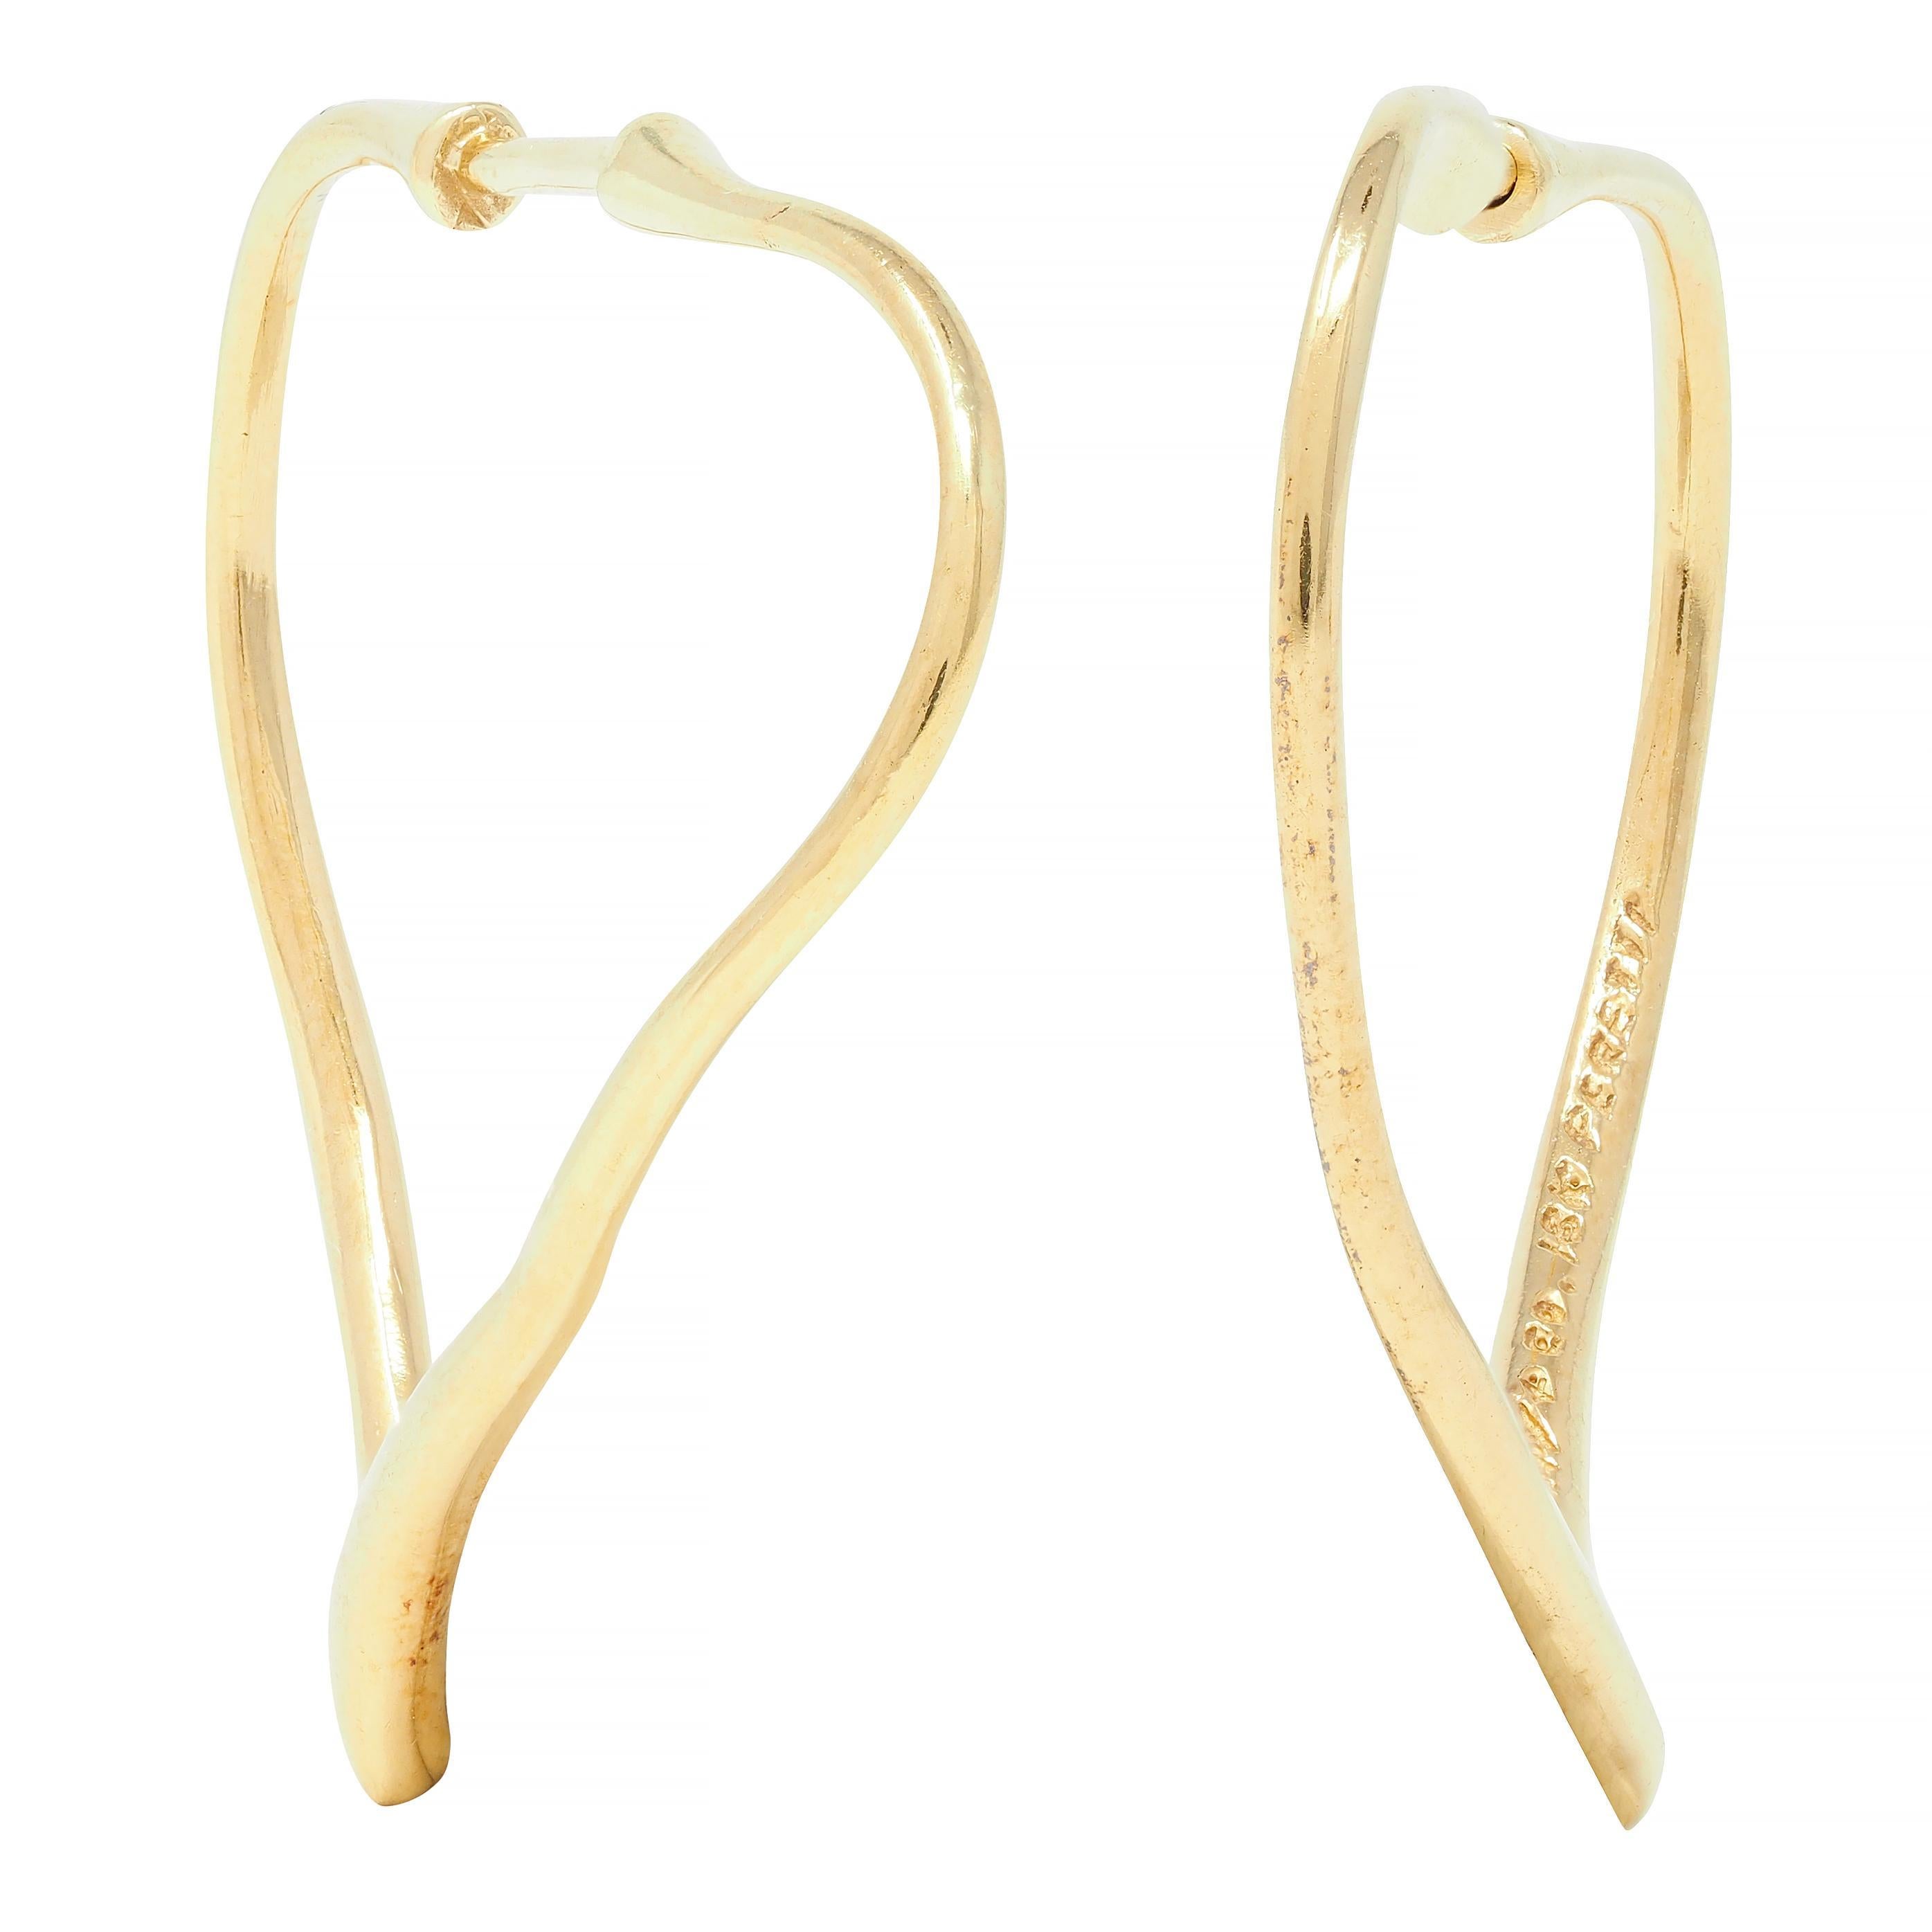 Designed as a stylized heart-shaped contour 
Sinuous with sleek minimal design 
Completed by posts with press in catch 
Stamped for 18 karat gold
Fully signed for Elsa Peretti and Tiffany & Co. 
Circa: 1990s
Measures: 1 1/4 x 1 3/8 inches
Total